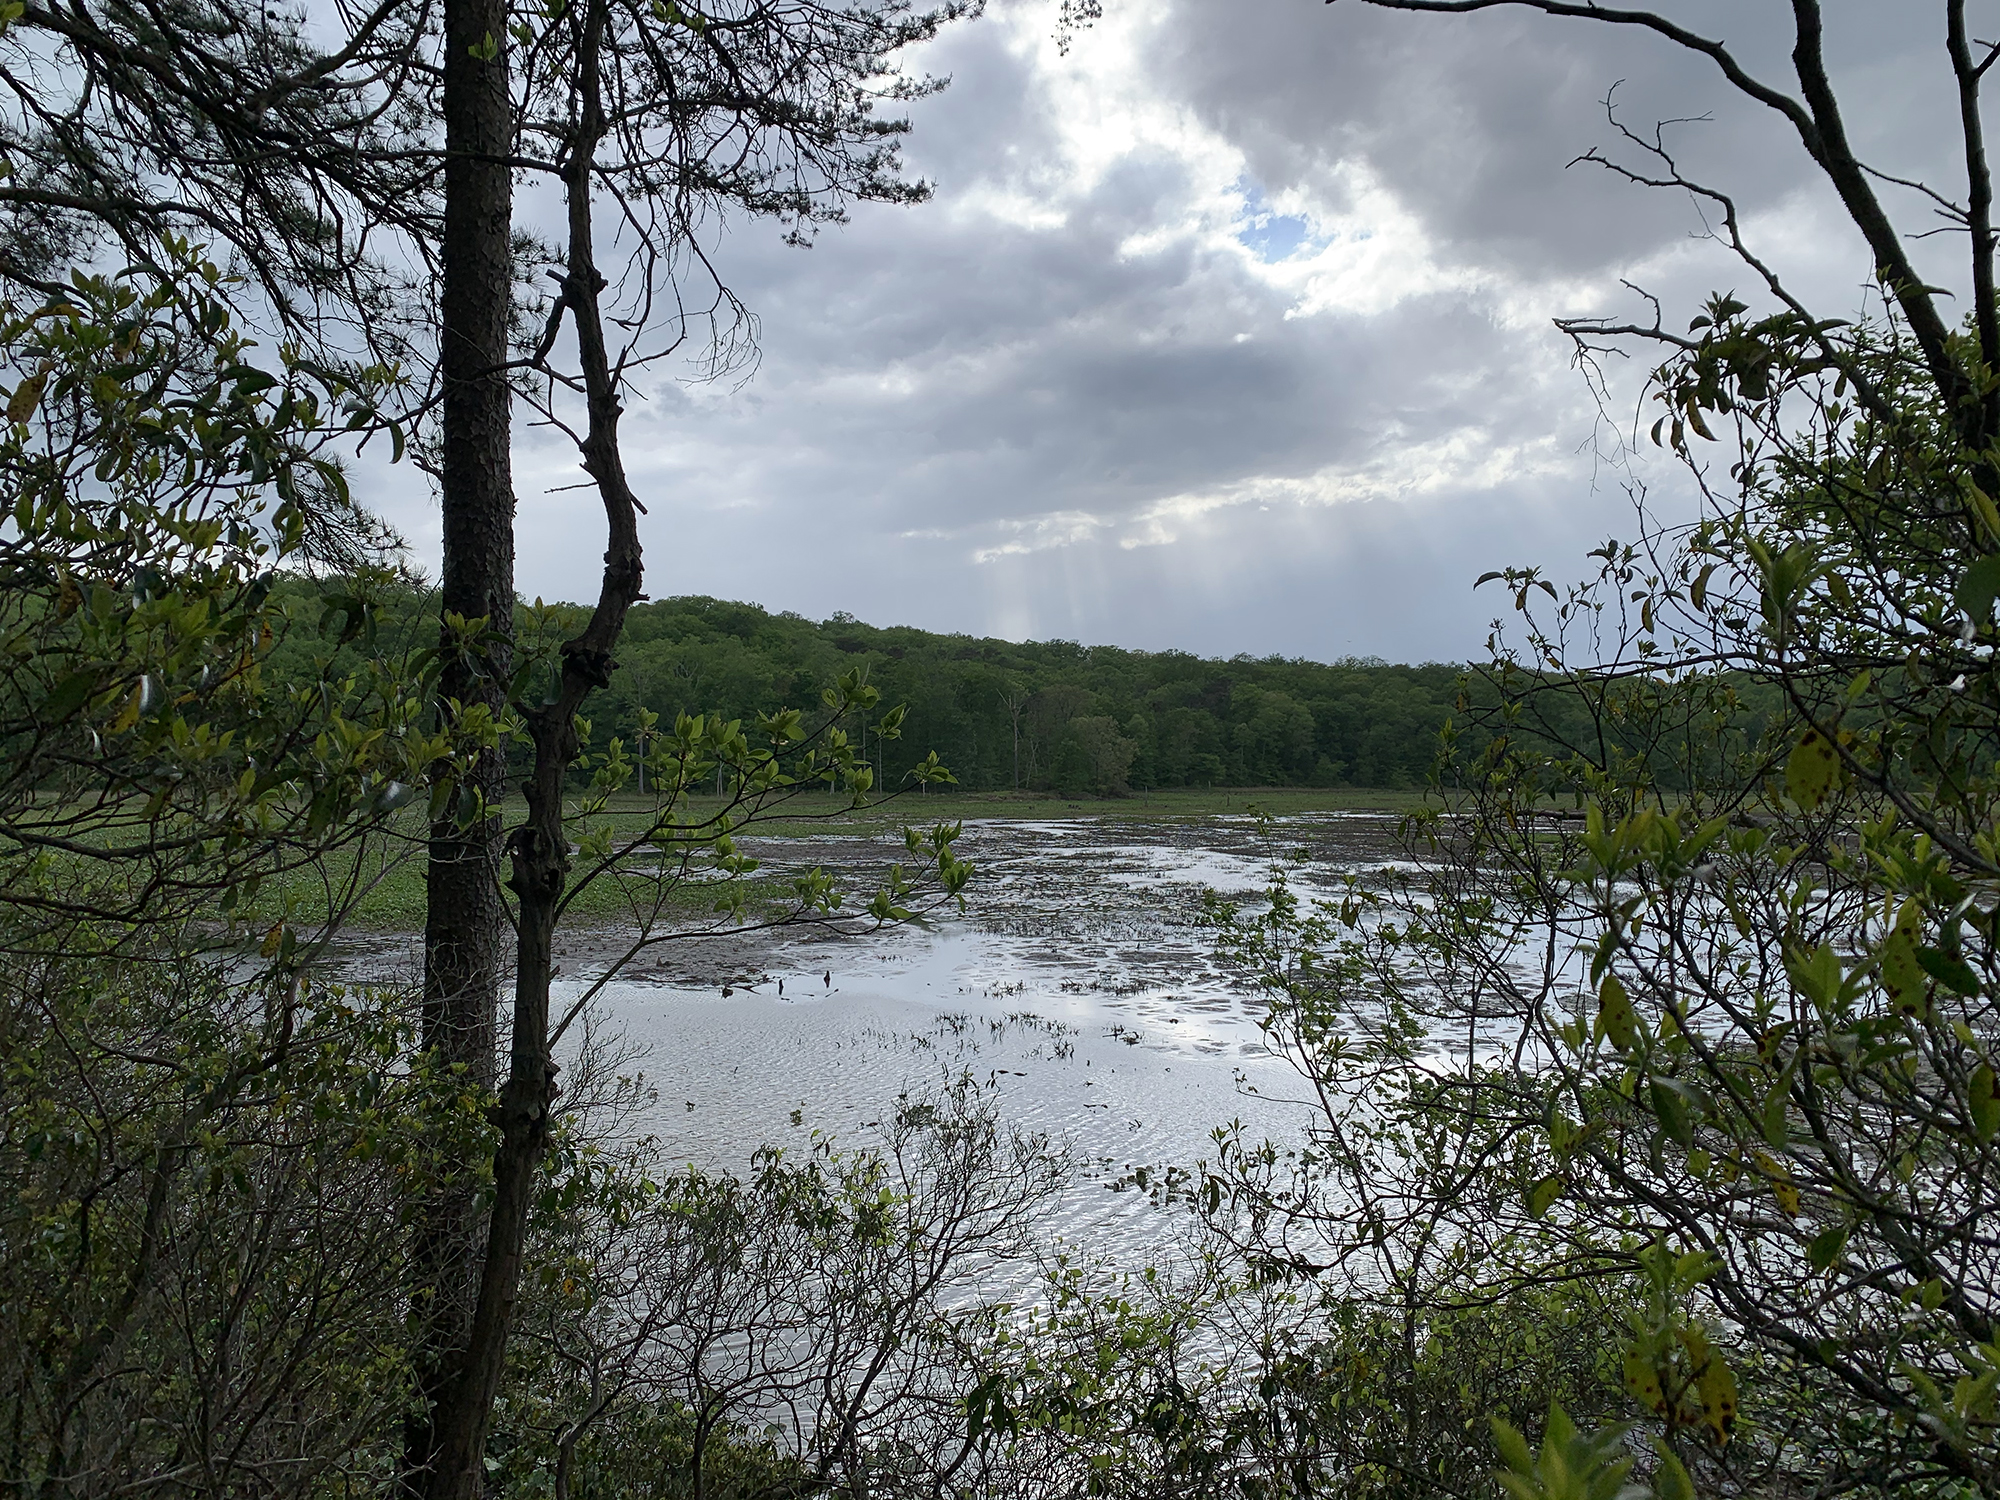 View through the trees of the remnants of a large lake.